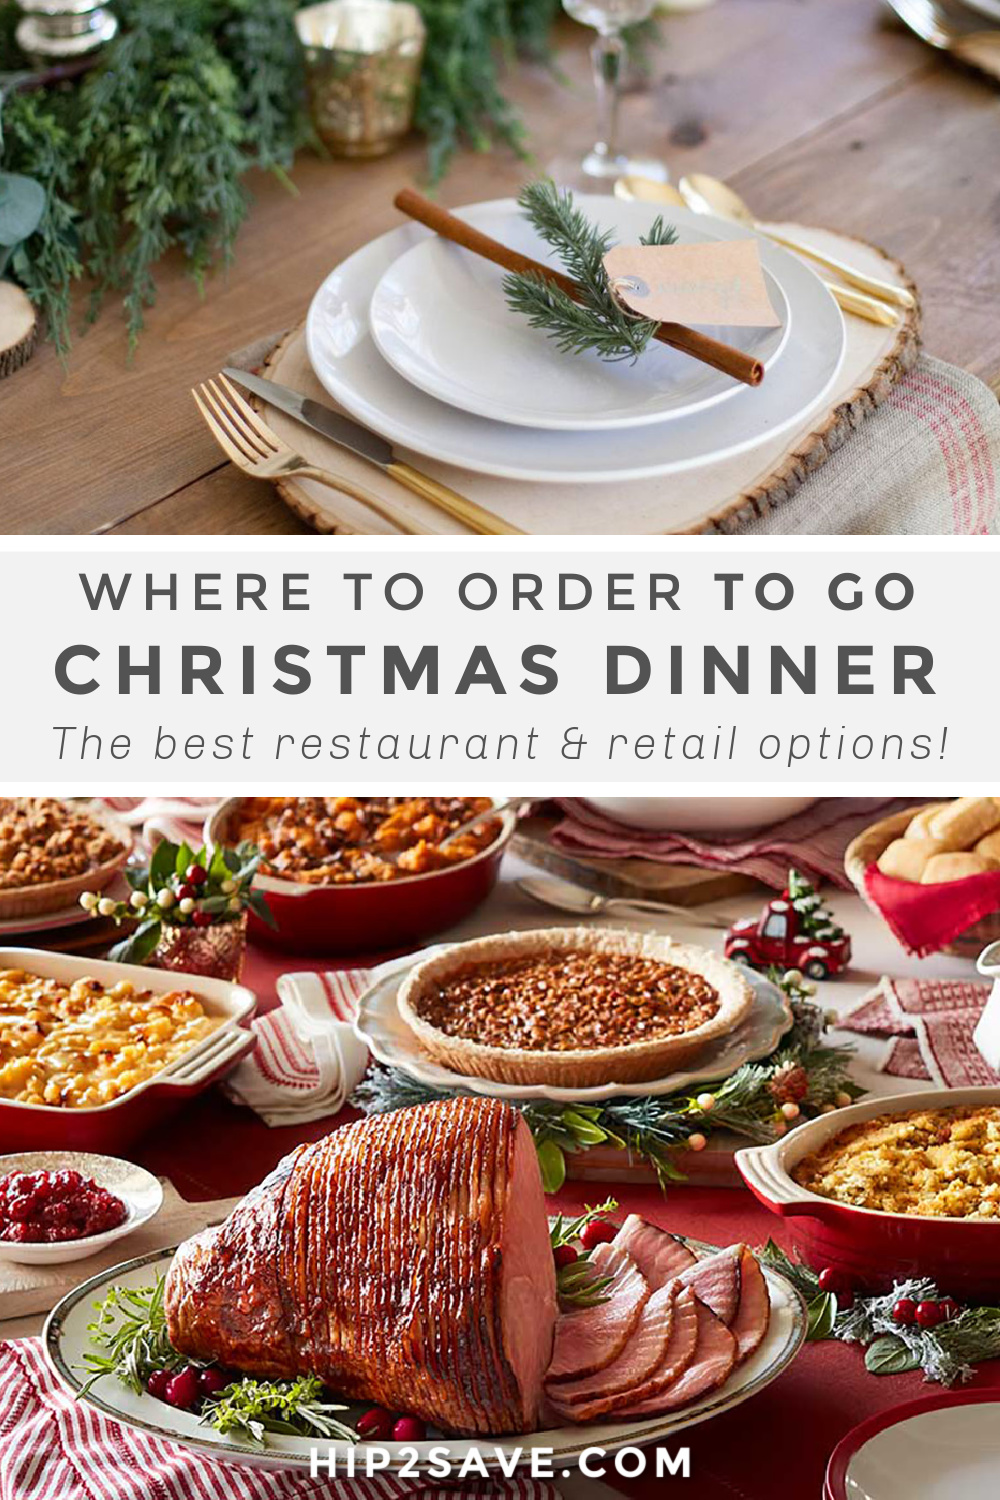 Get Christmas Day Dinner To Go From These Restaurants | Hip2Save